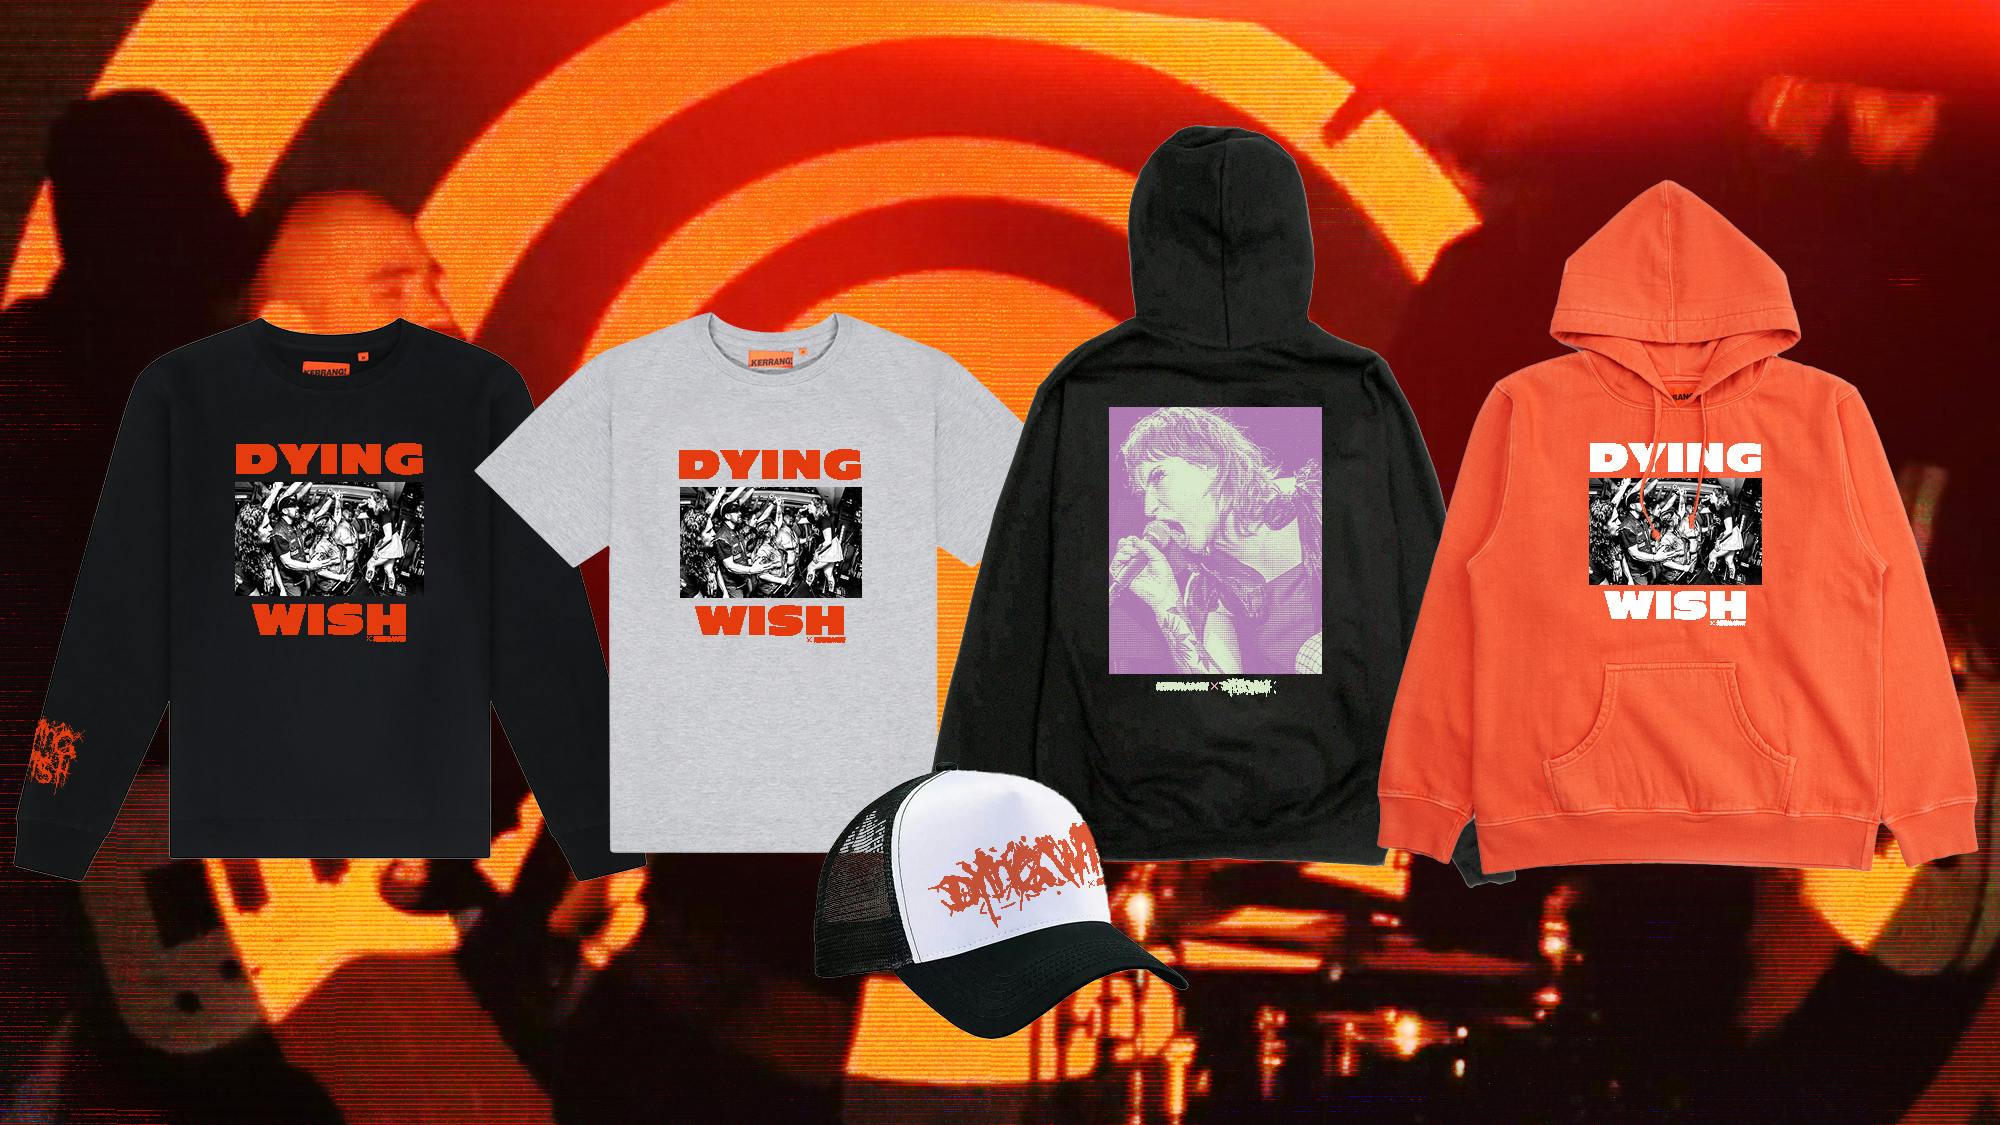 Check out the new Kerrang! x Dying Wish capsule collection